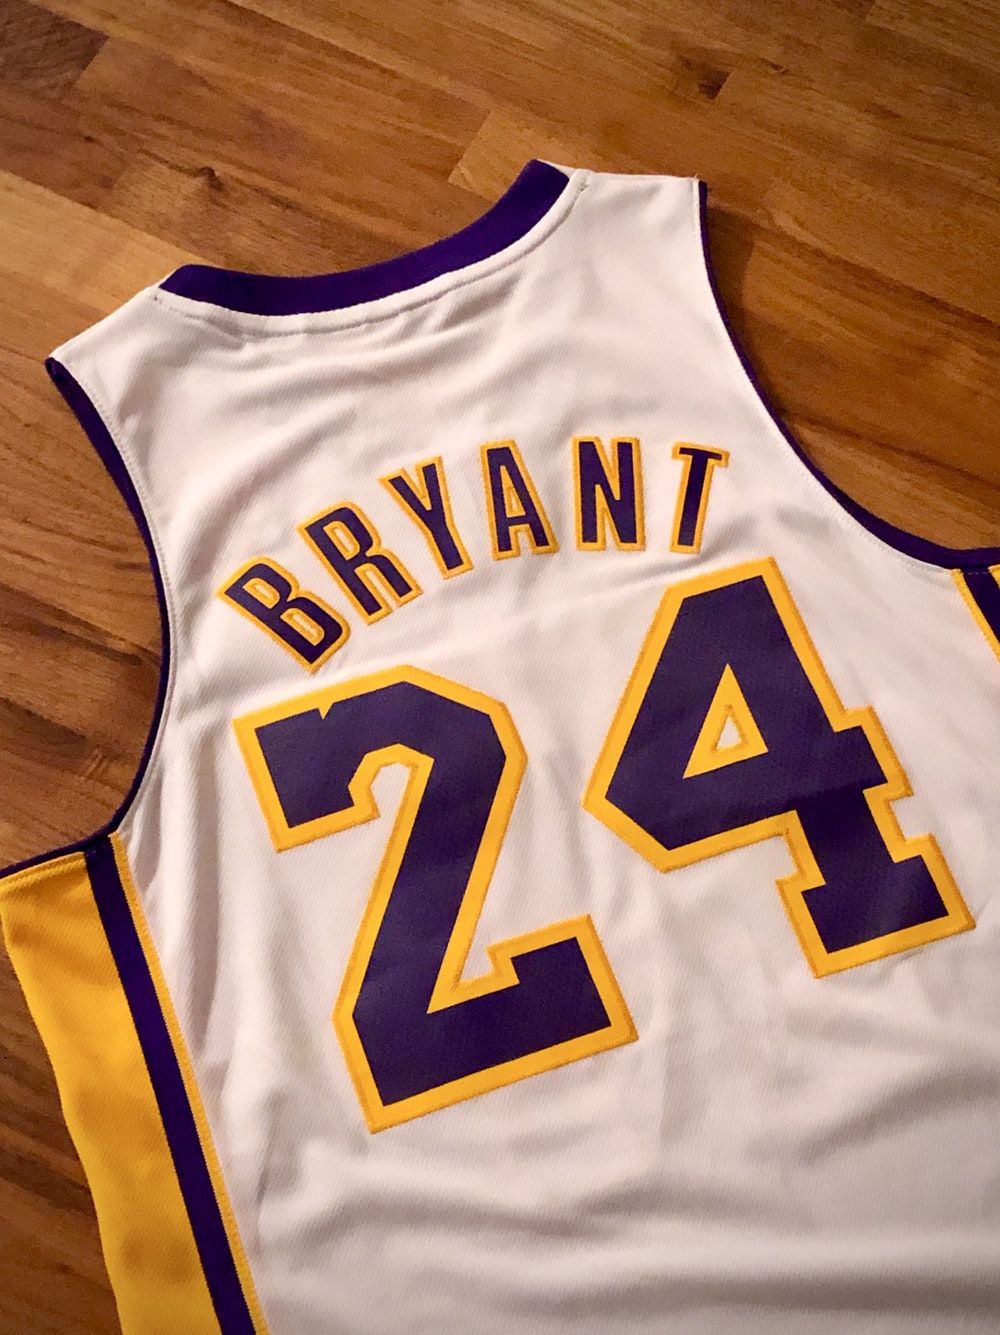 Lakers Jersey Picture. Download Free Image